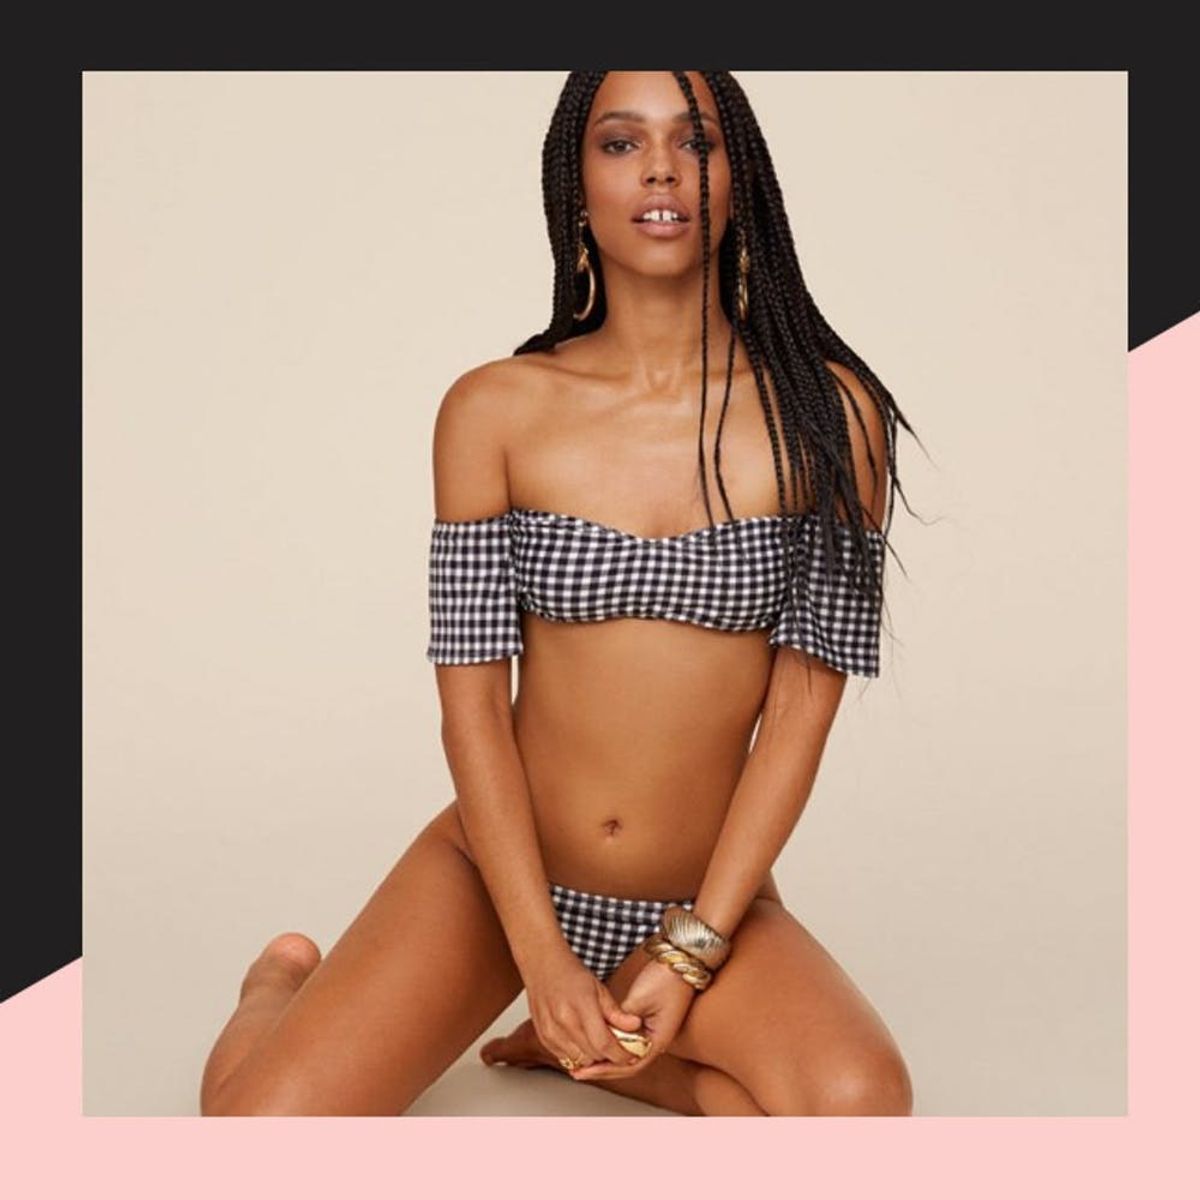 Reformation Launched a Swimwear Collection and Now We Can Plan Our Vacation